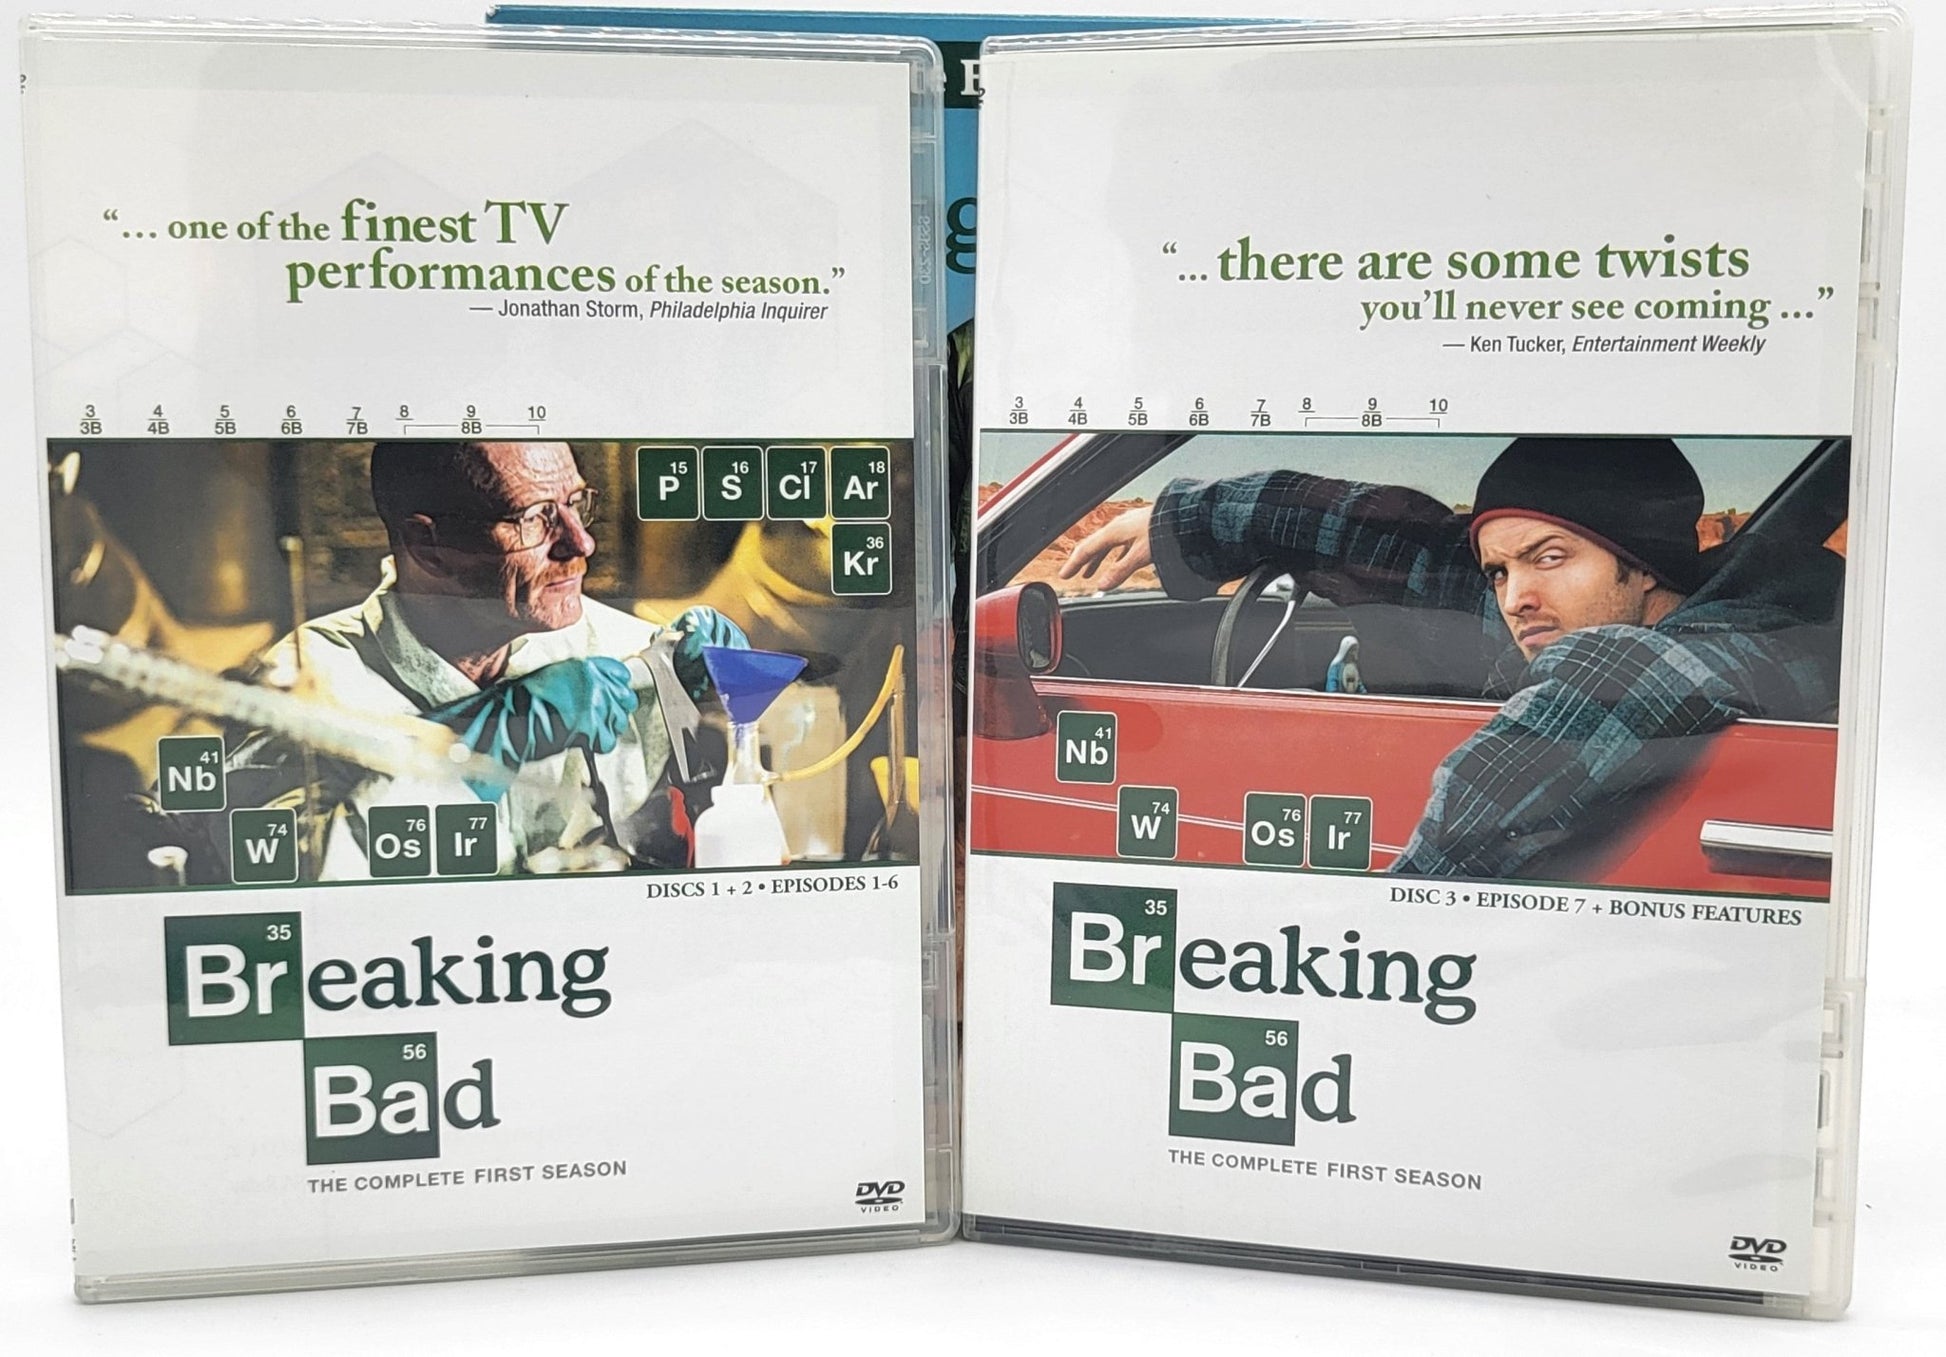 Sony Pictures Home Entertainment - Breaking Bad | DVD | The Complete First Season - DVD - Steady Bunny Shop